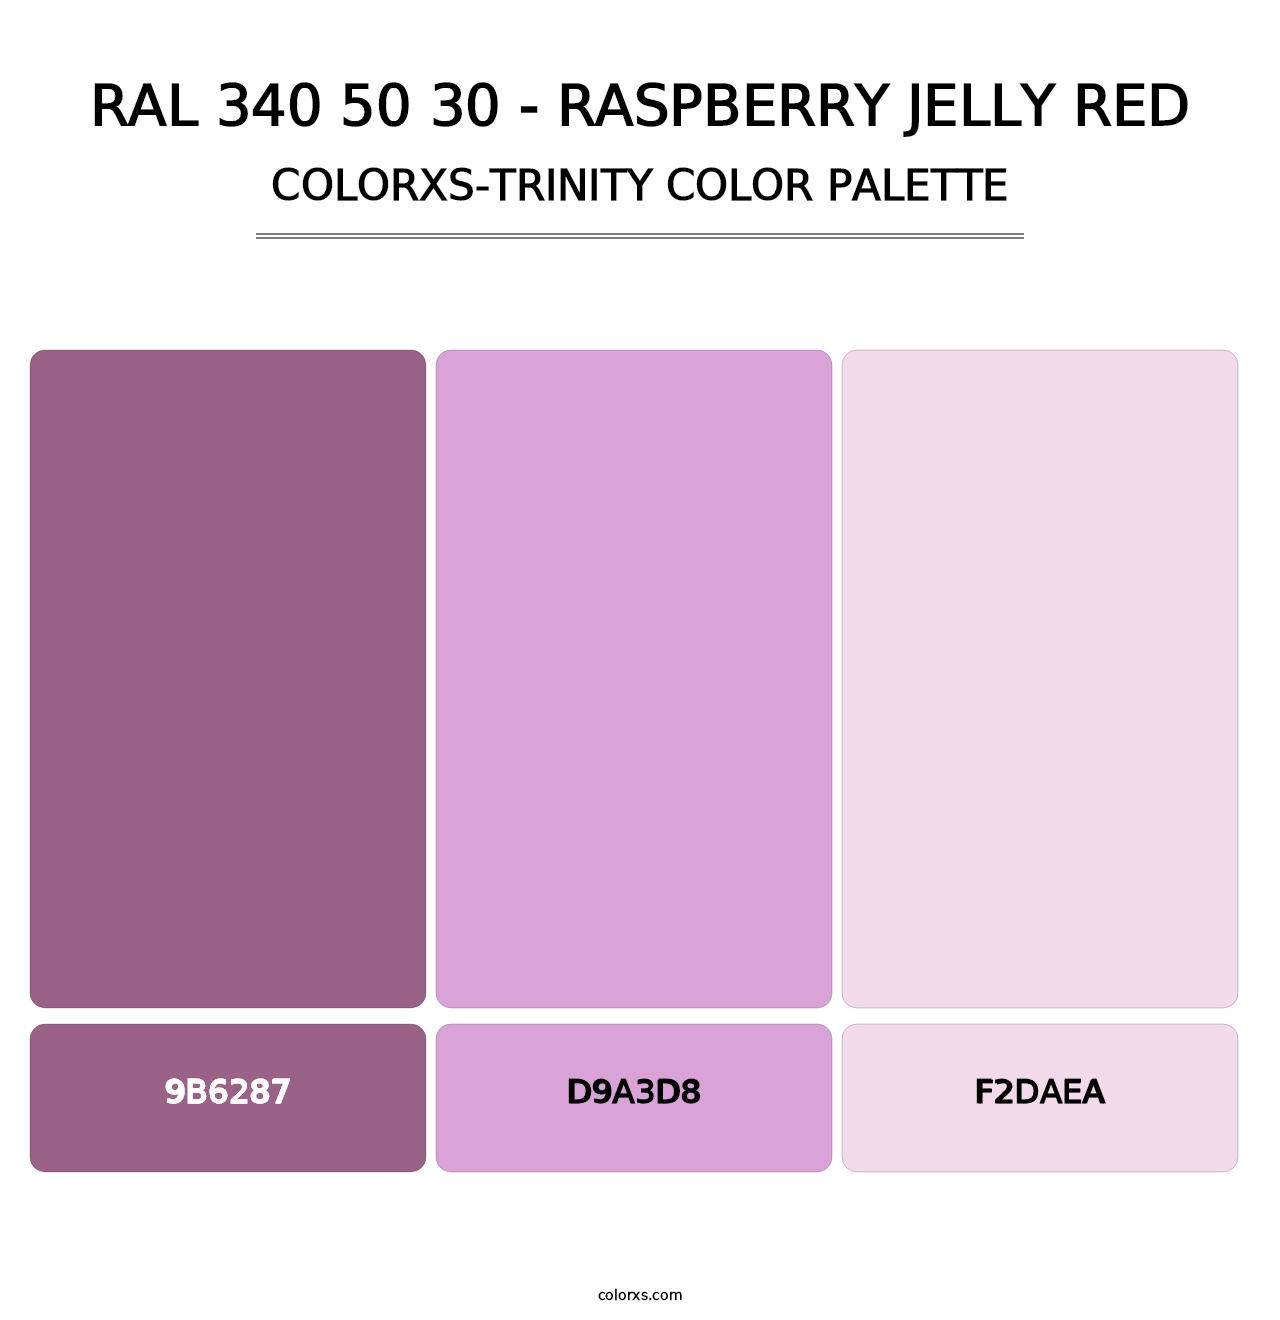 RAL 340 50 30 - Raspberry Jelly Red - Colorxs Trinity Palette